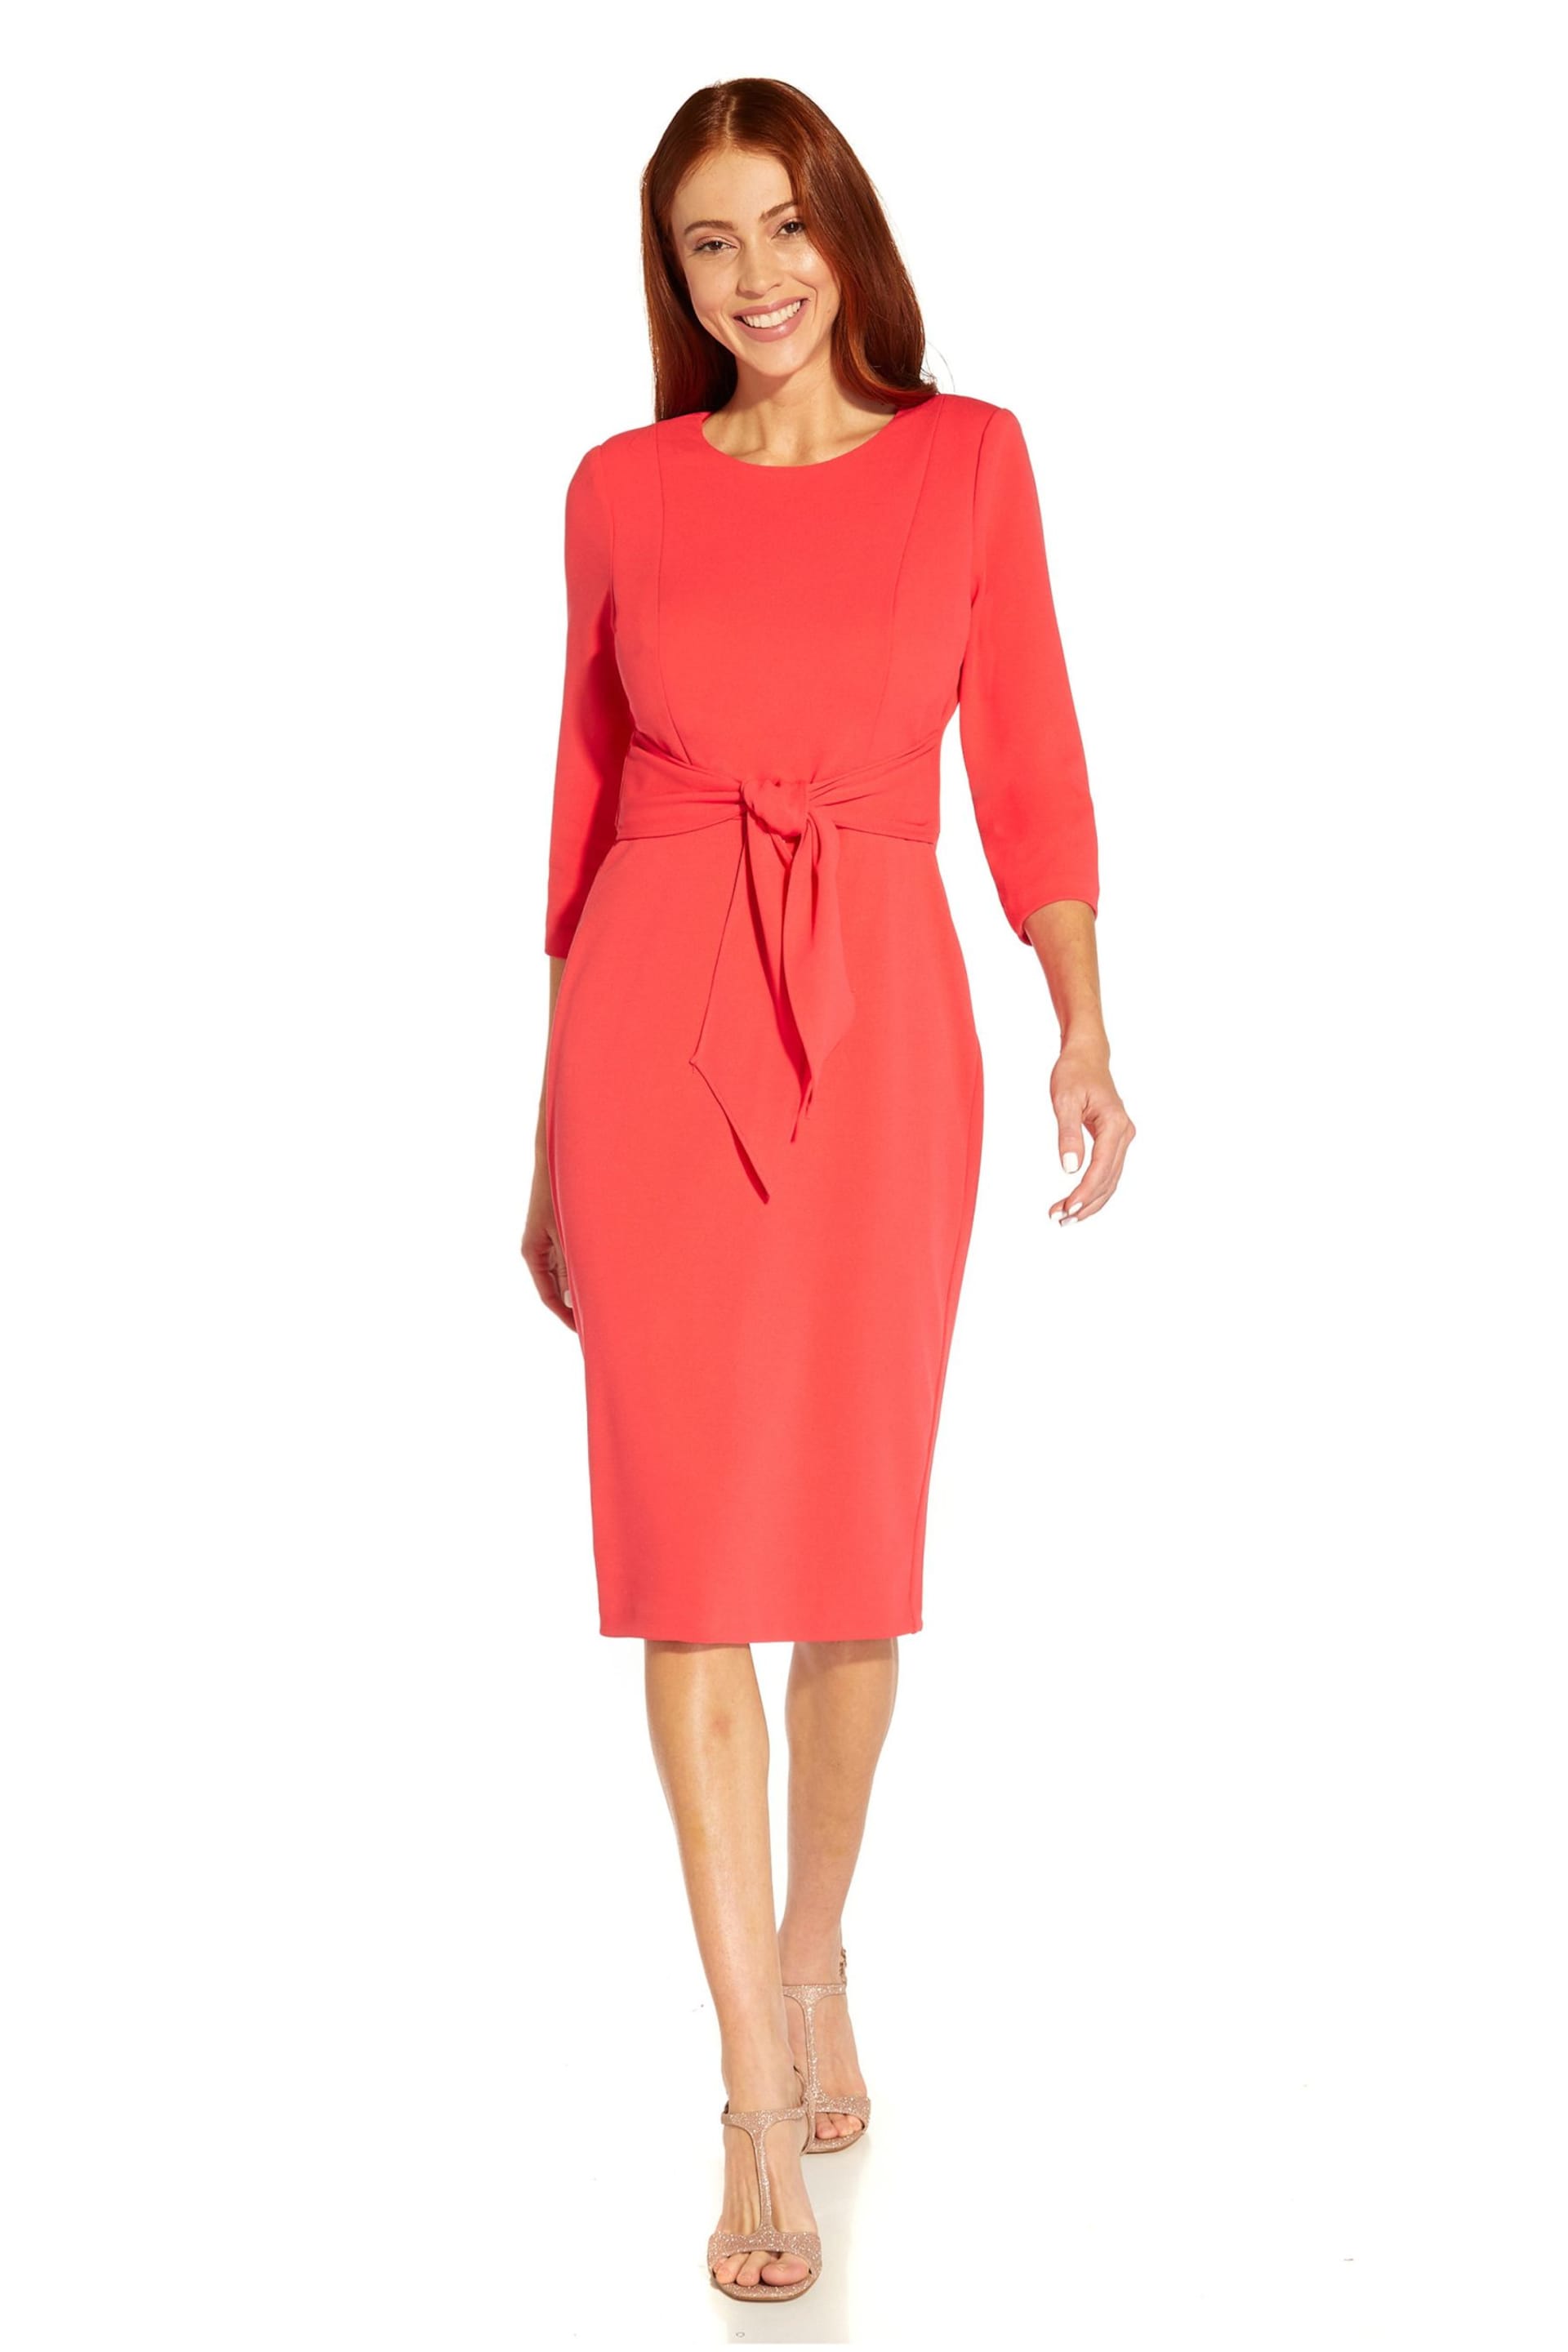 Adrianna Papell Red Knit Crepe Tie Waist Sheath Dress - Image 3 of 6